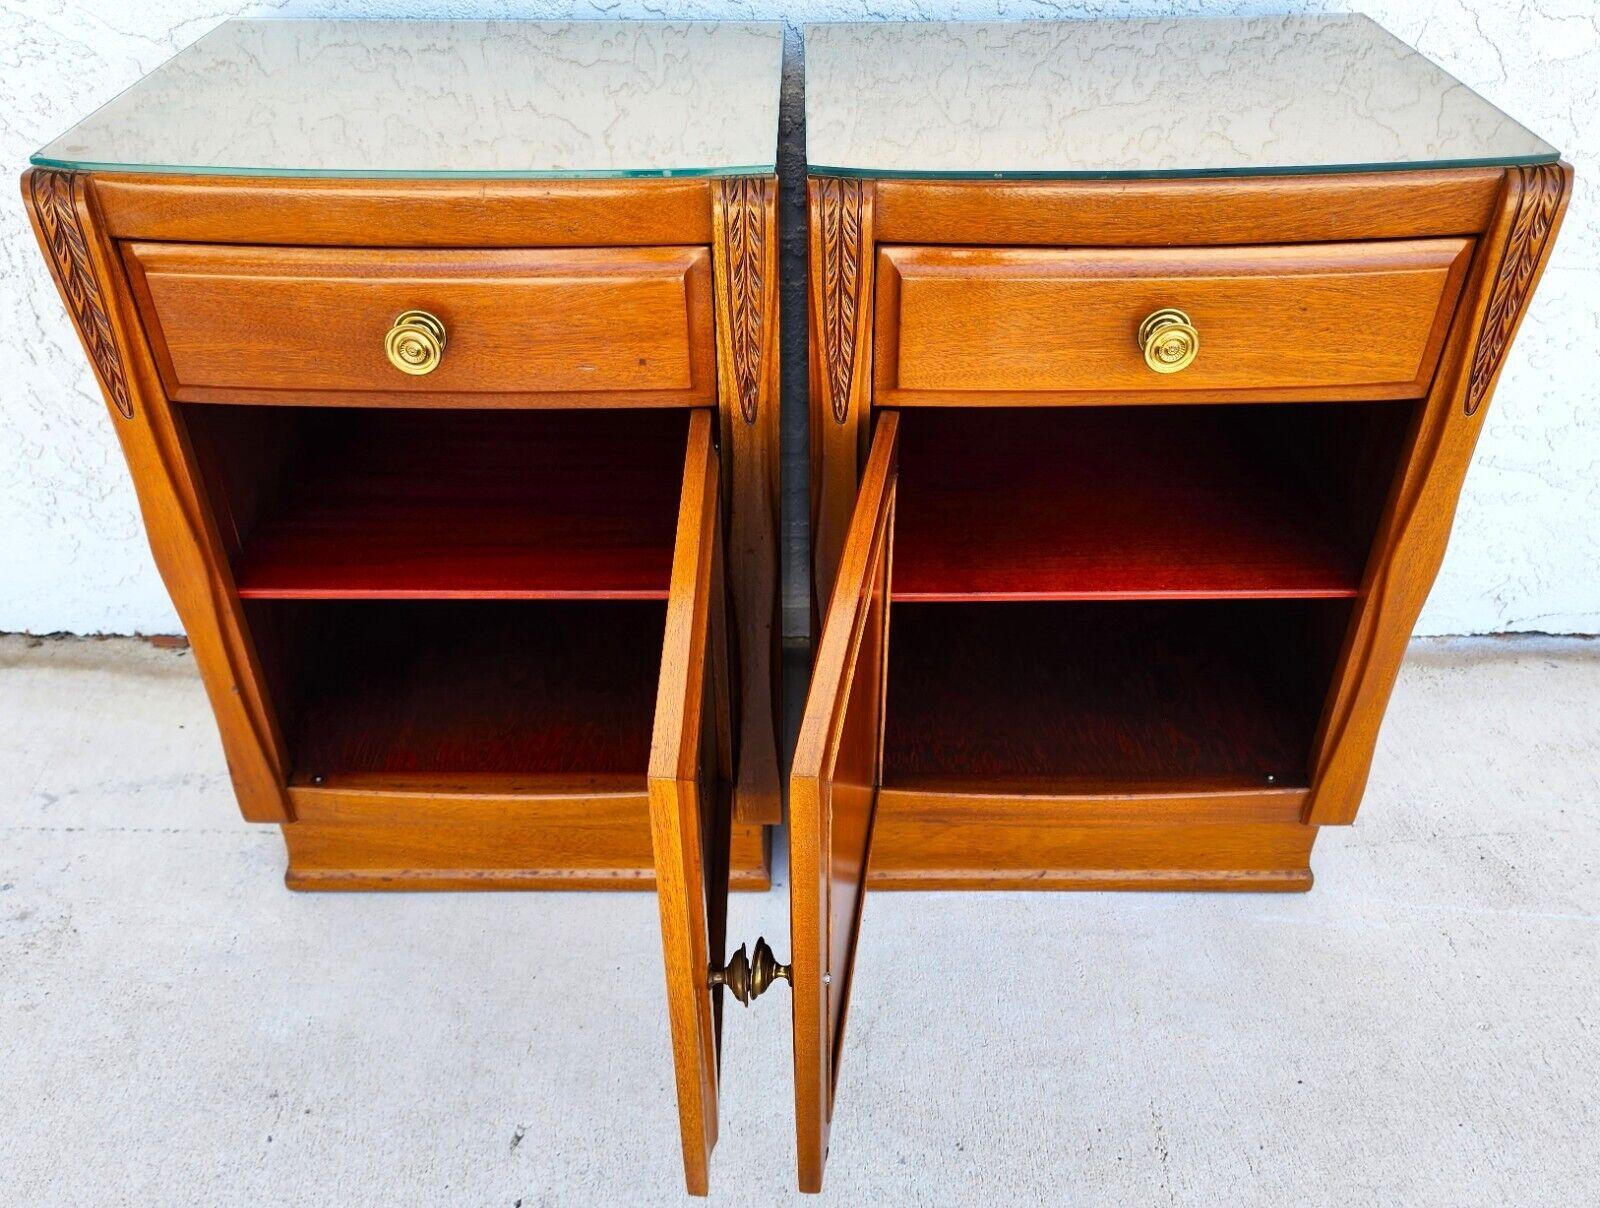 Offering One Of Our Recent Palm Beach Estate fine Furniture Acquisitions Of A 
Pair of Vintage Nightstands with Custom Cut Glass Tops by DVORKIN of NY
The frames, front doors, and drawers are solid wood and there is veneer under the glass and